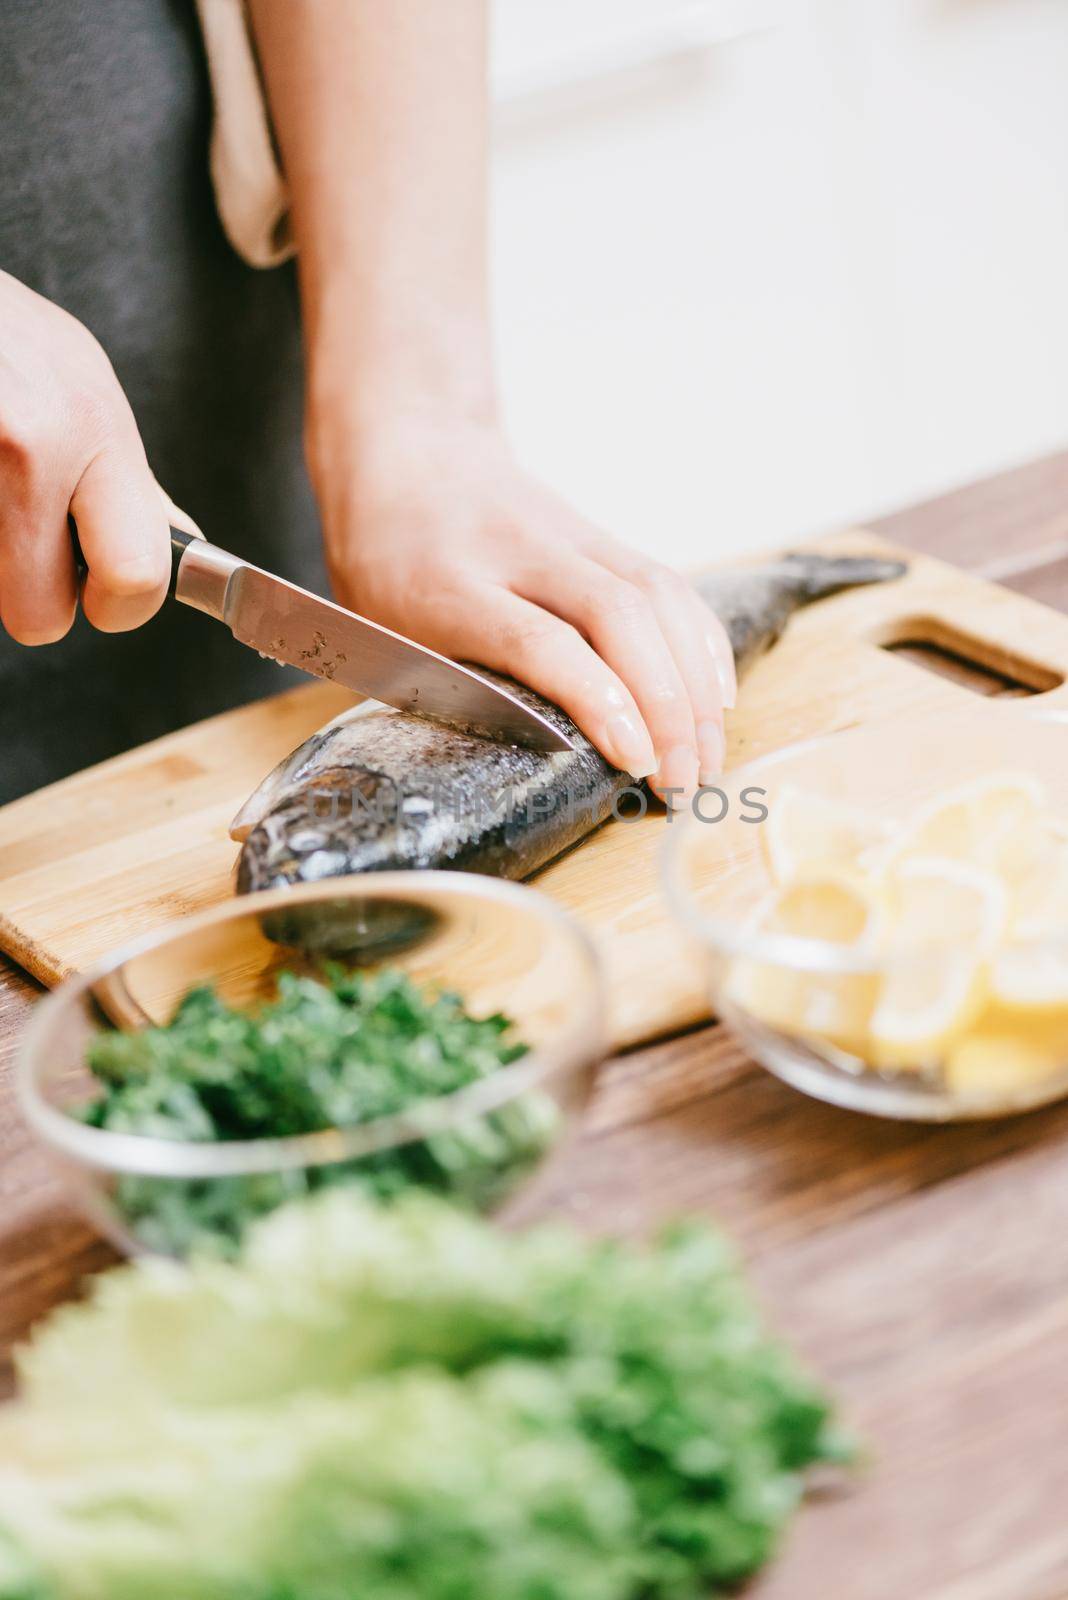 Unrecognizable woman cutting raw fish on wooden board for dish in the kitchen, view of hands.